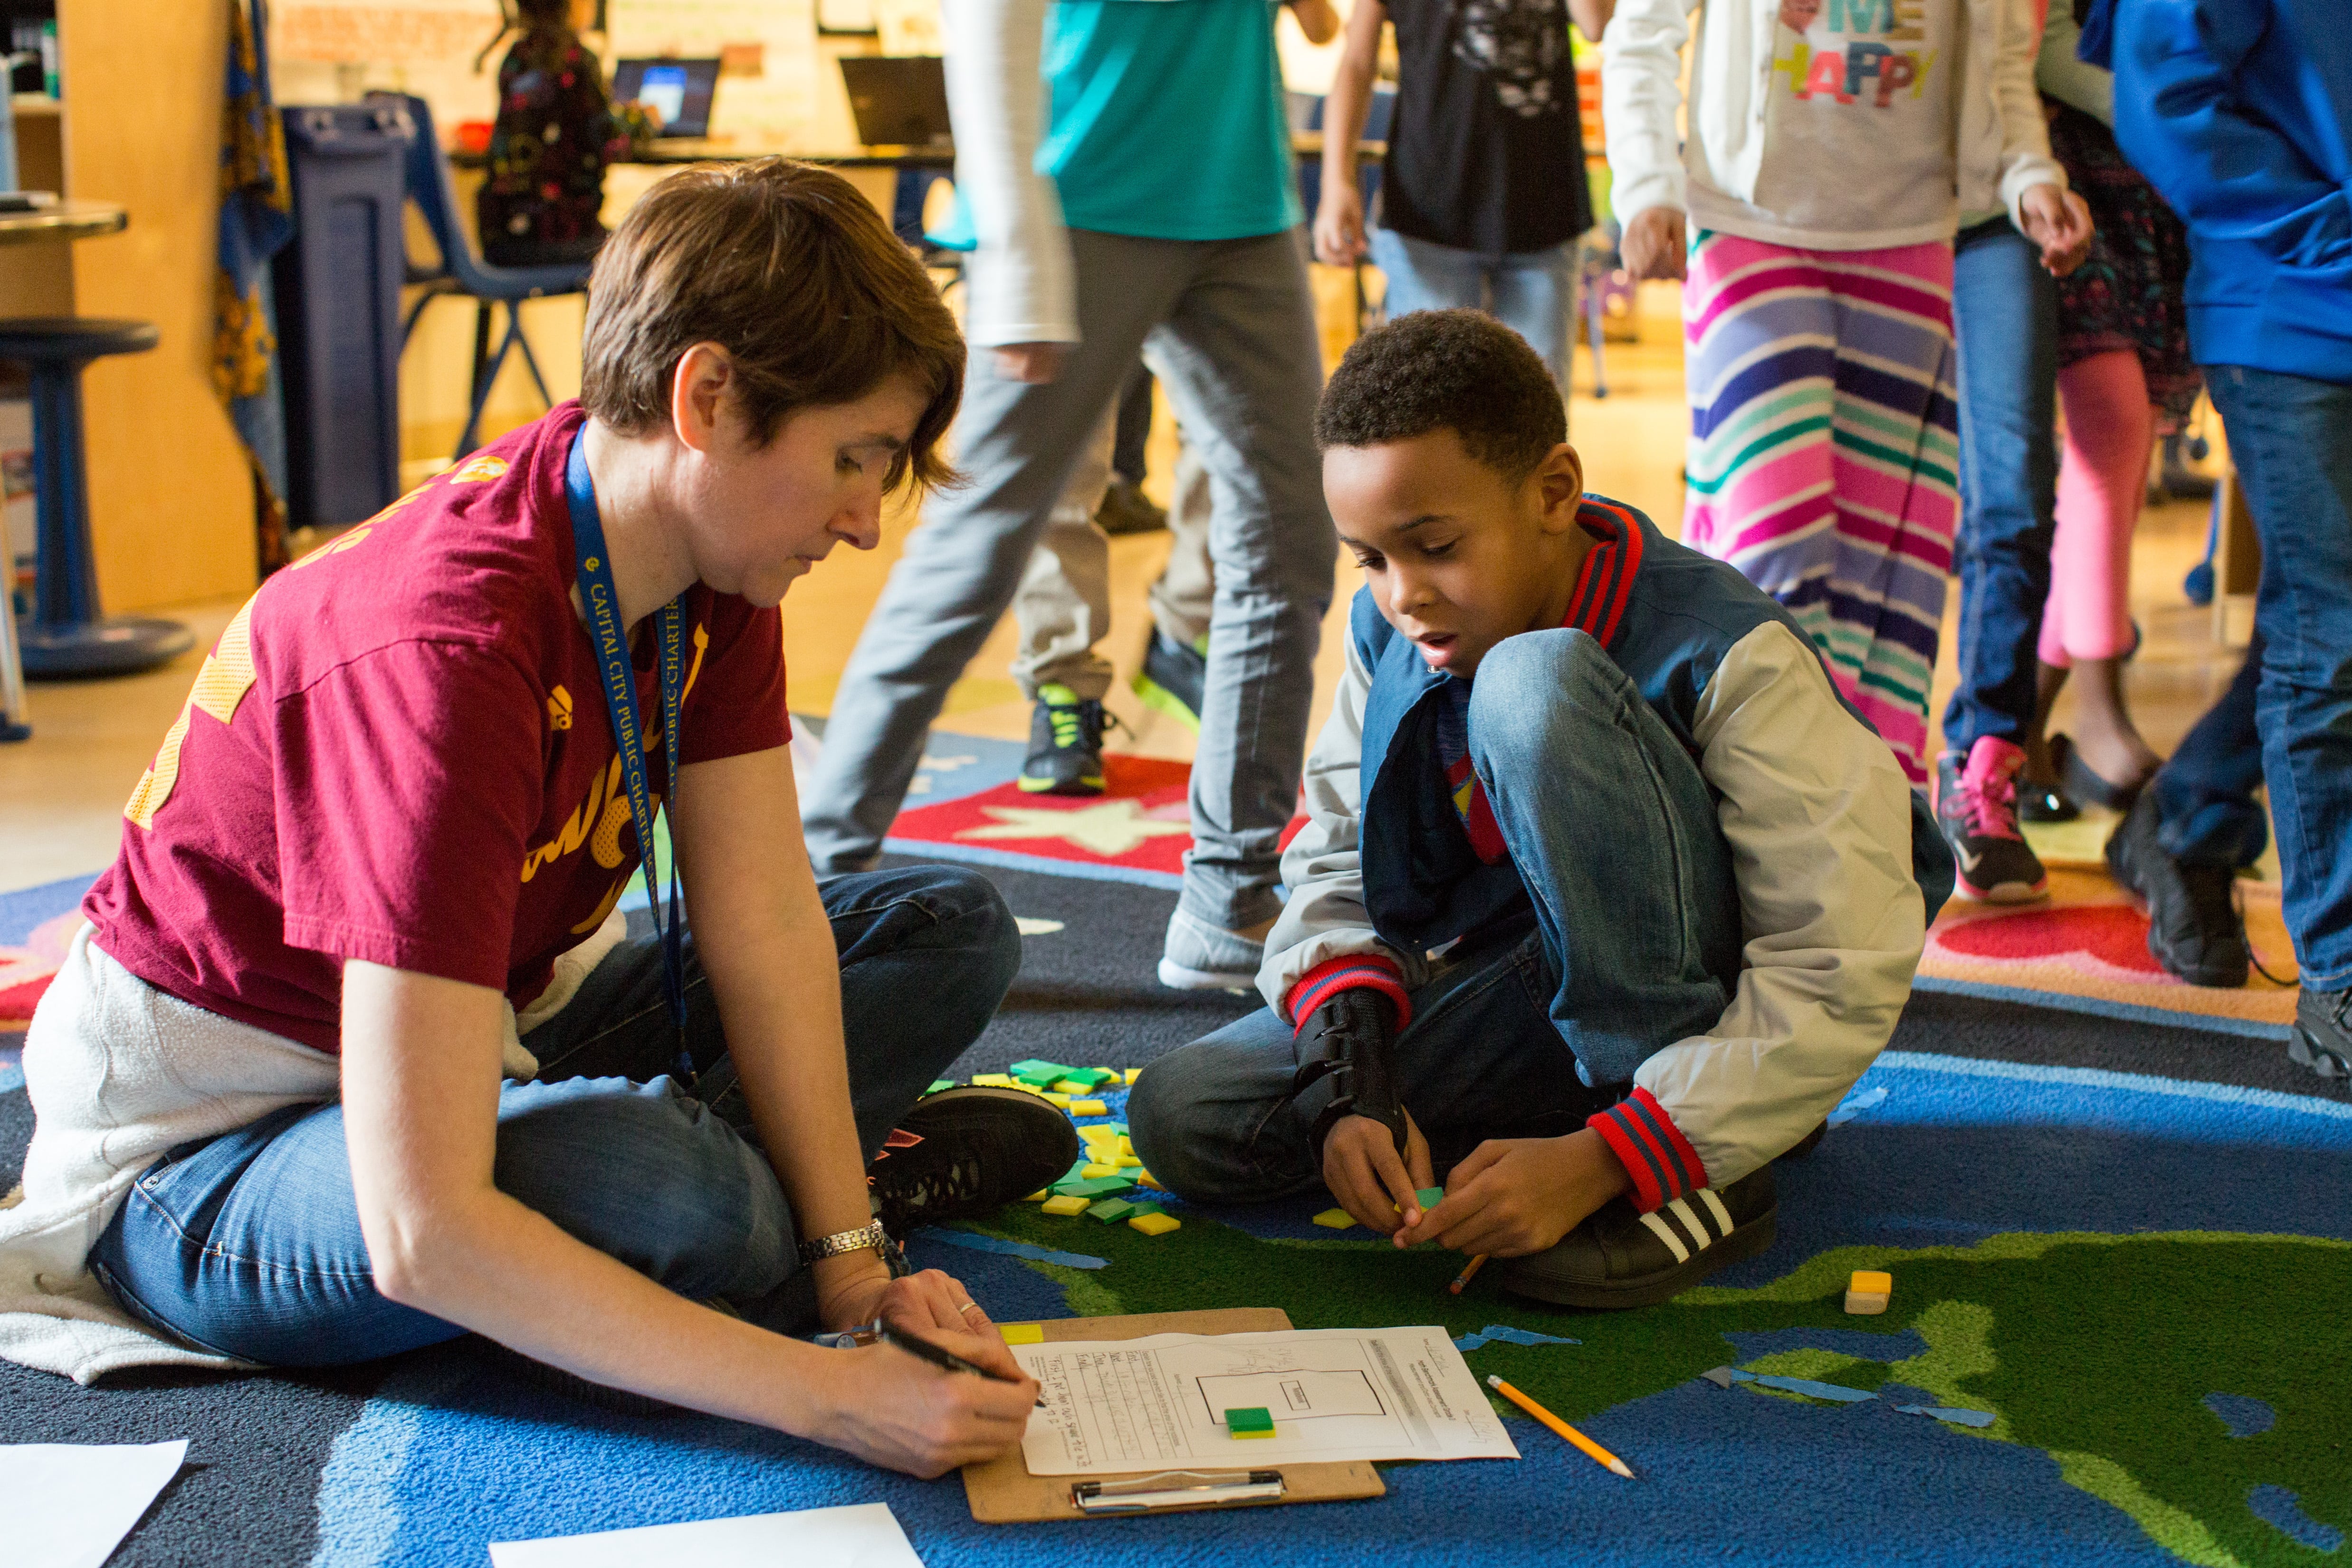 A female teacher wearing a red shirt sits on a carpet and helps a male student in third grade with a math assignment.